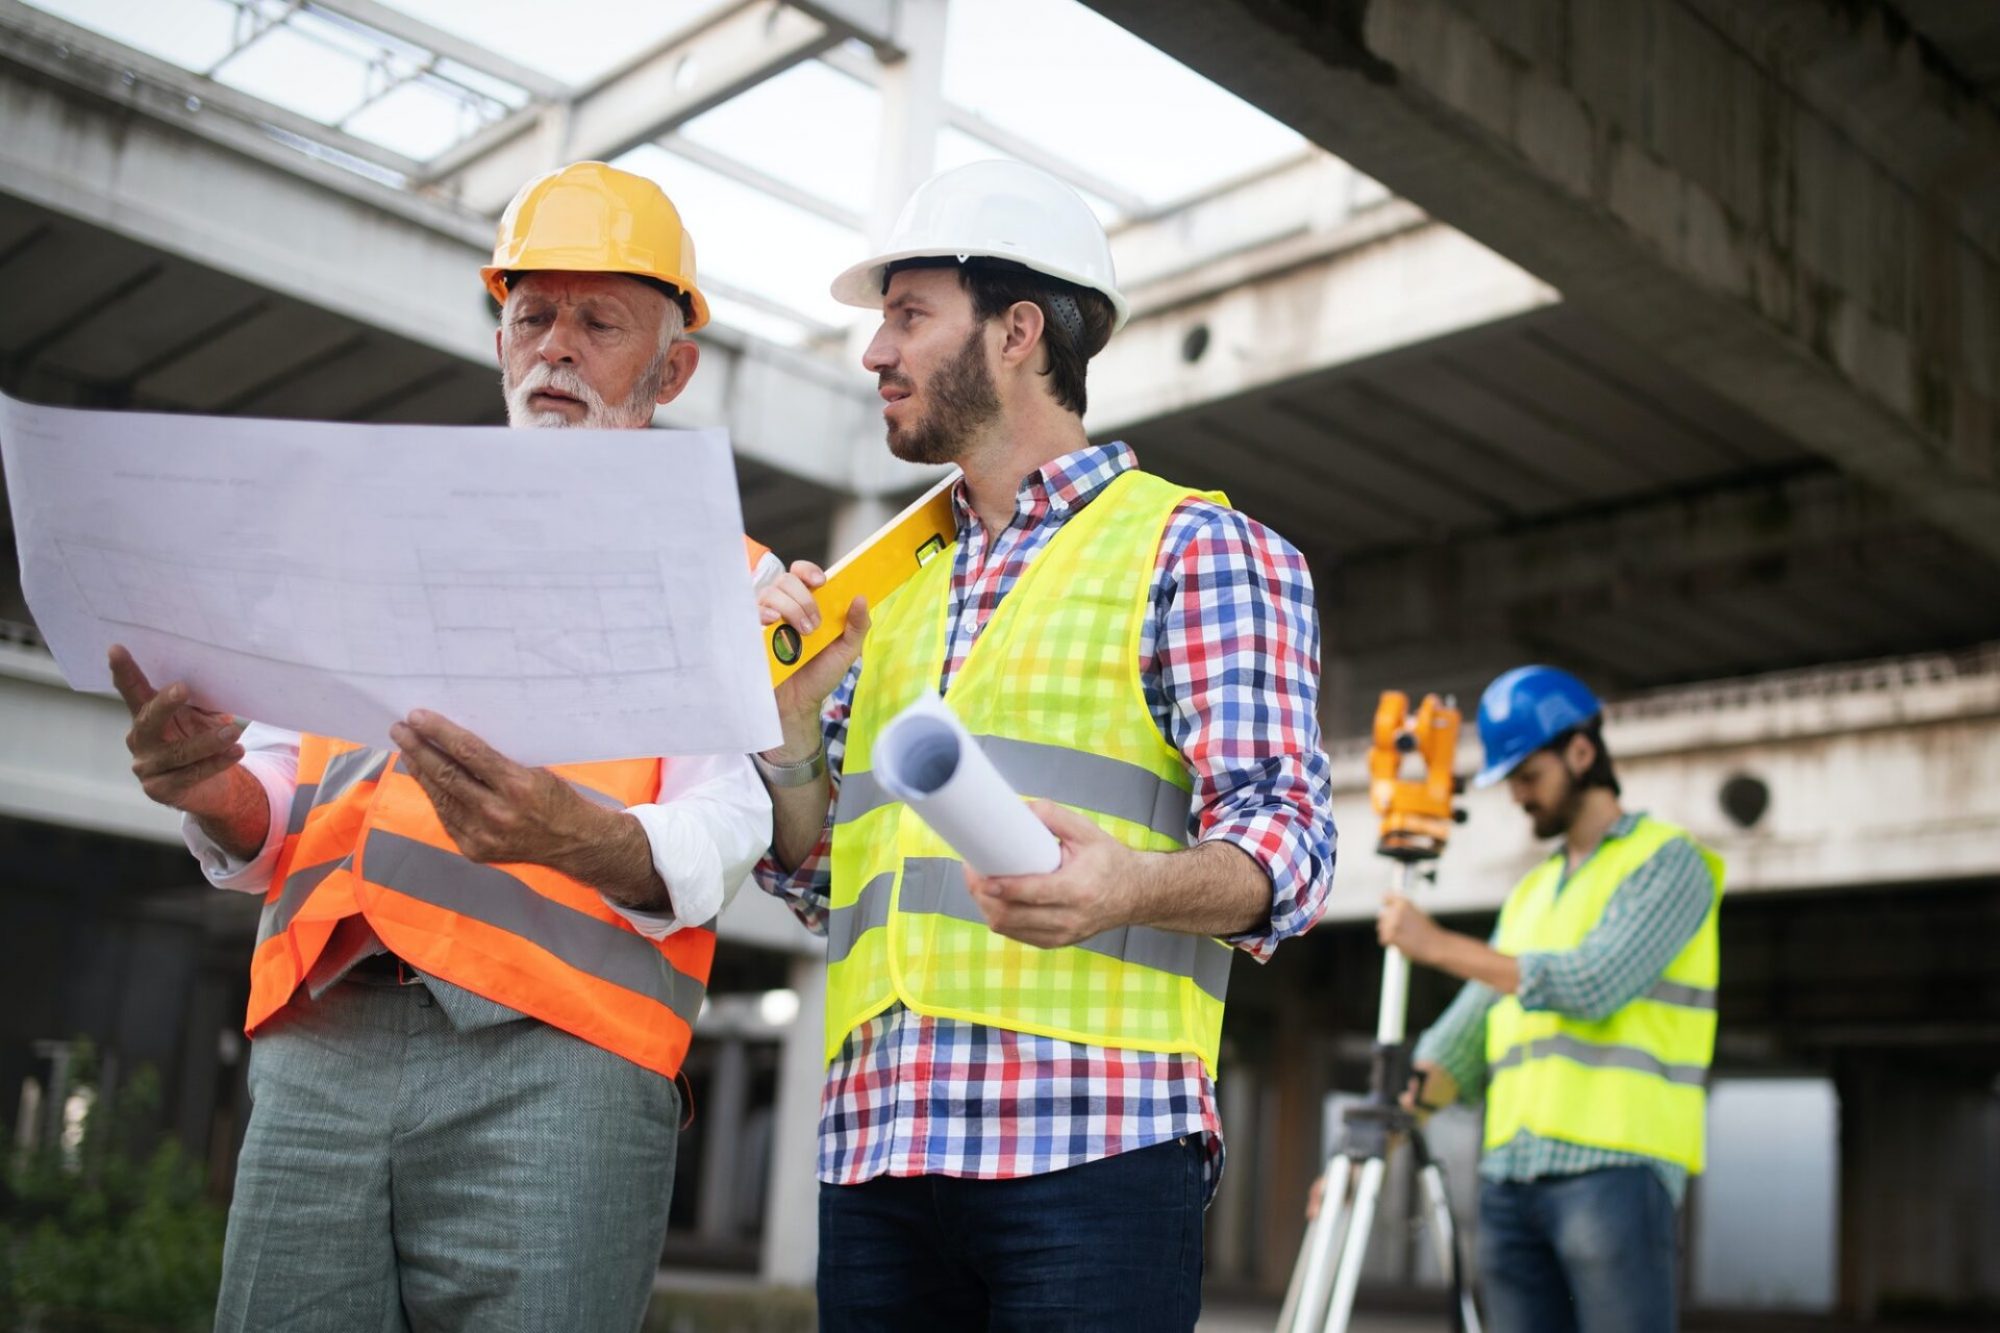 engineer-foreman-and-worker-discussing-in-building-construction-site.jpg